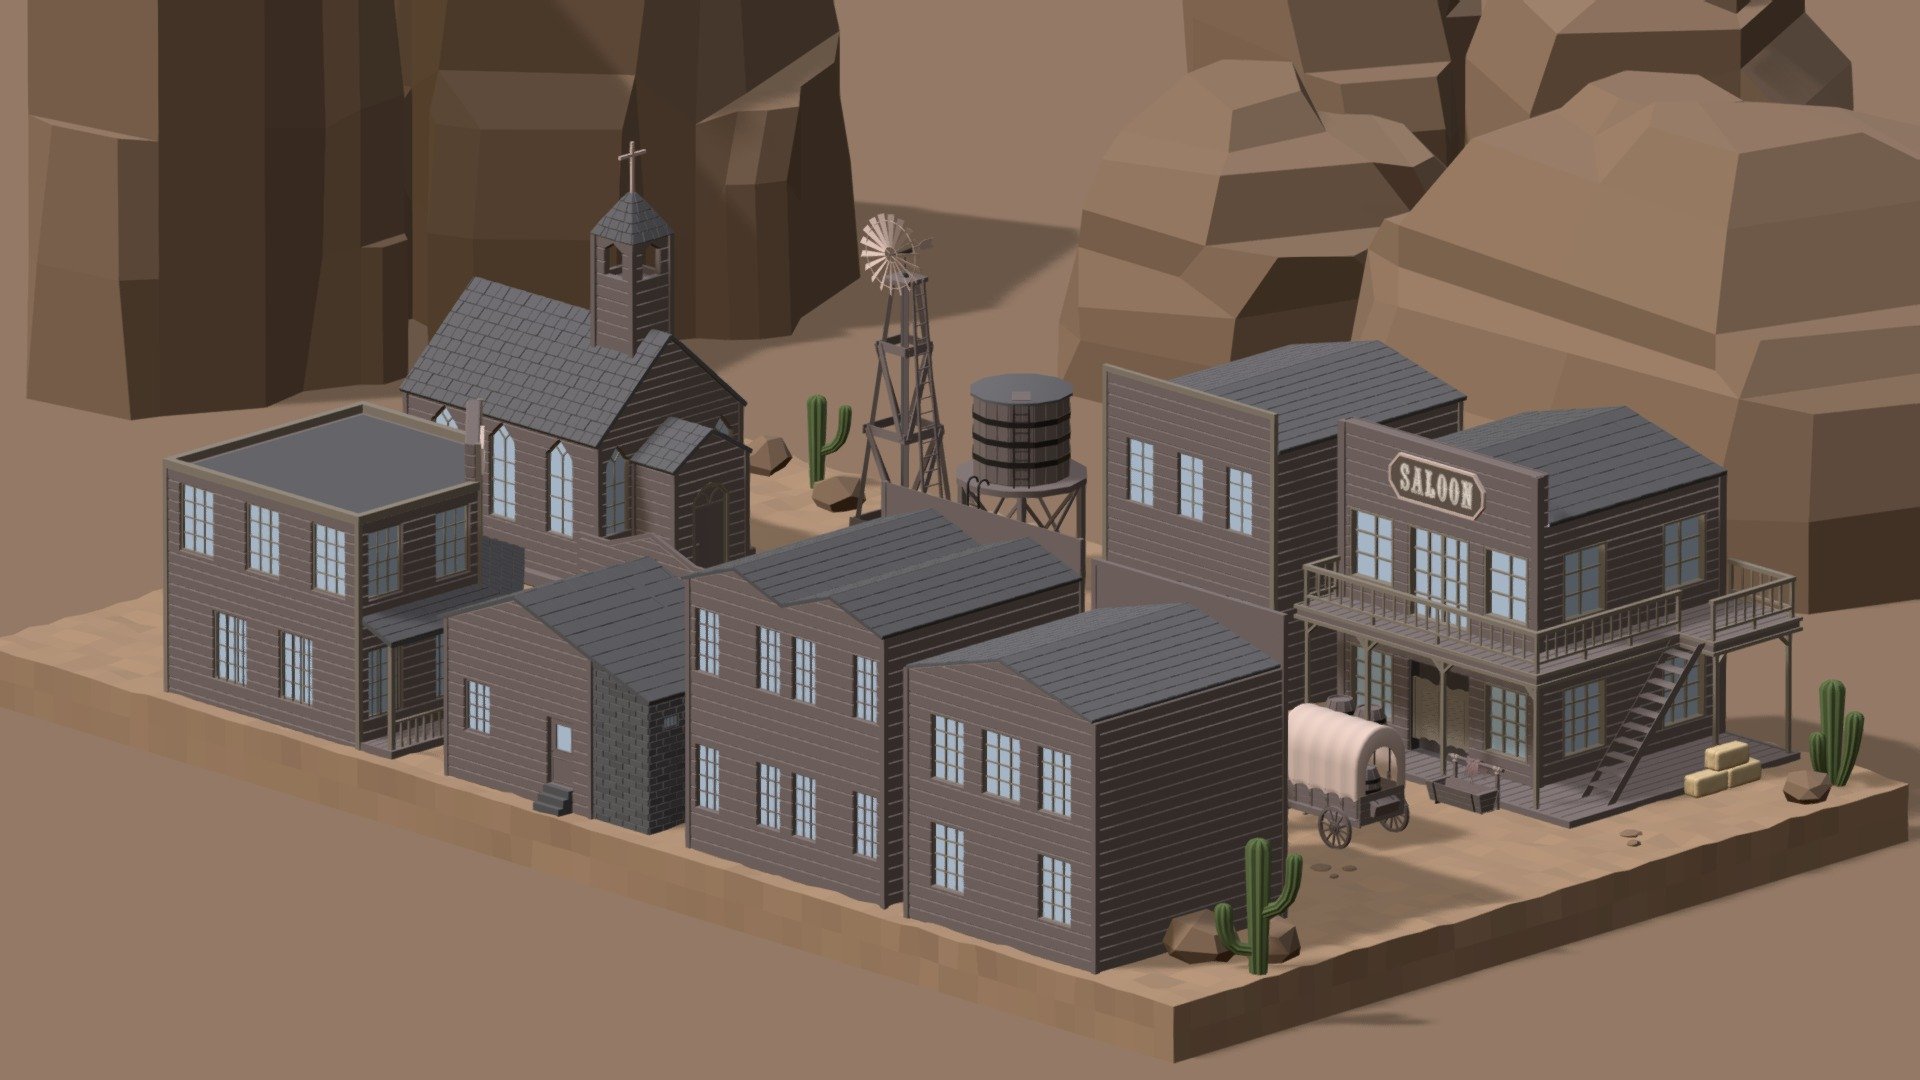 Hello everyone !

I am pleased to present to you this western pack that will blend in with any decor of this style ! You can integrate this mini scene in all your games or animations and create a unique decor of which only you have the secret ! This pack contains:

A saloon
A bank
A sheriff's office
A chapel
Houses
A wind pump
A water tank
A covered cart
Cactus
Rocks
Mountains
Cobblestones
A horse saddle
A watering trough
A cowboy hat
Straw bale
Barril
In fact, everything you see in the images above.

Let yourself be carried away by your imagination ! Enjoy ! - Western - Buy Royalty Free 3D model by ApprenticeRaccoon 3d model